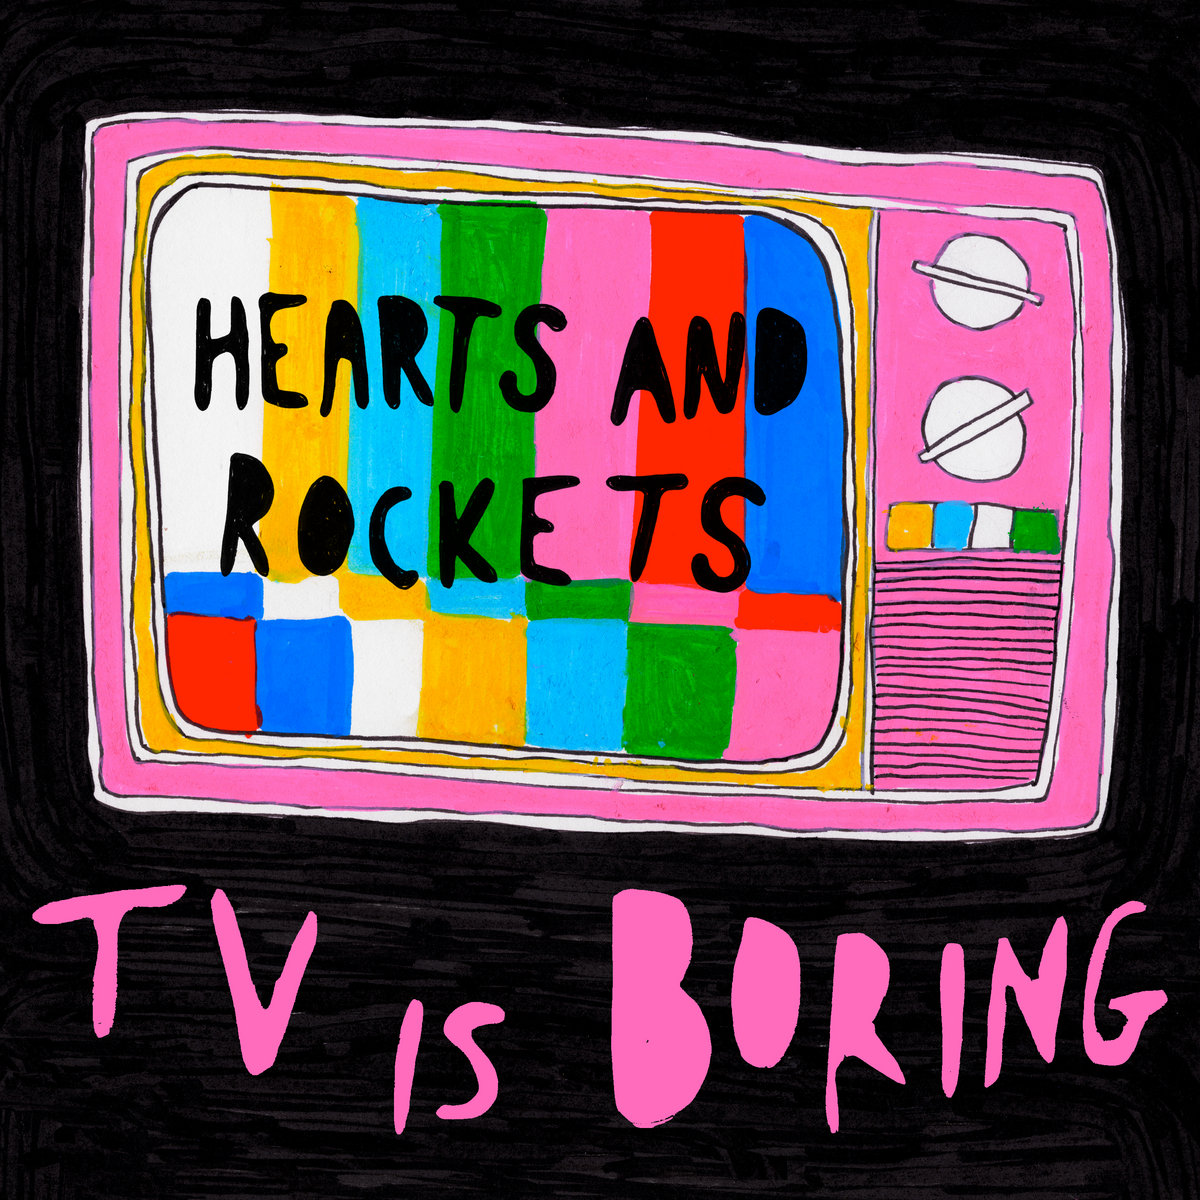 Hearts and Rockets - TV is Boring